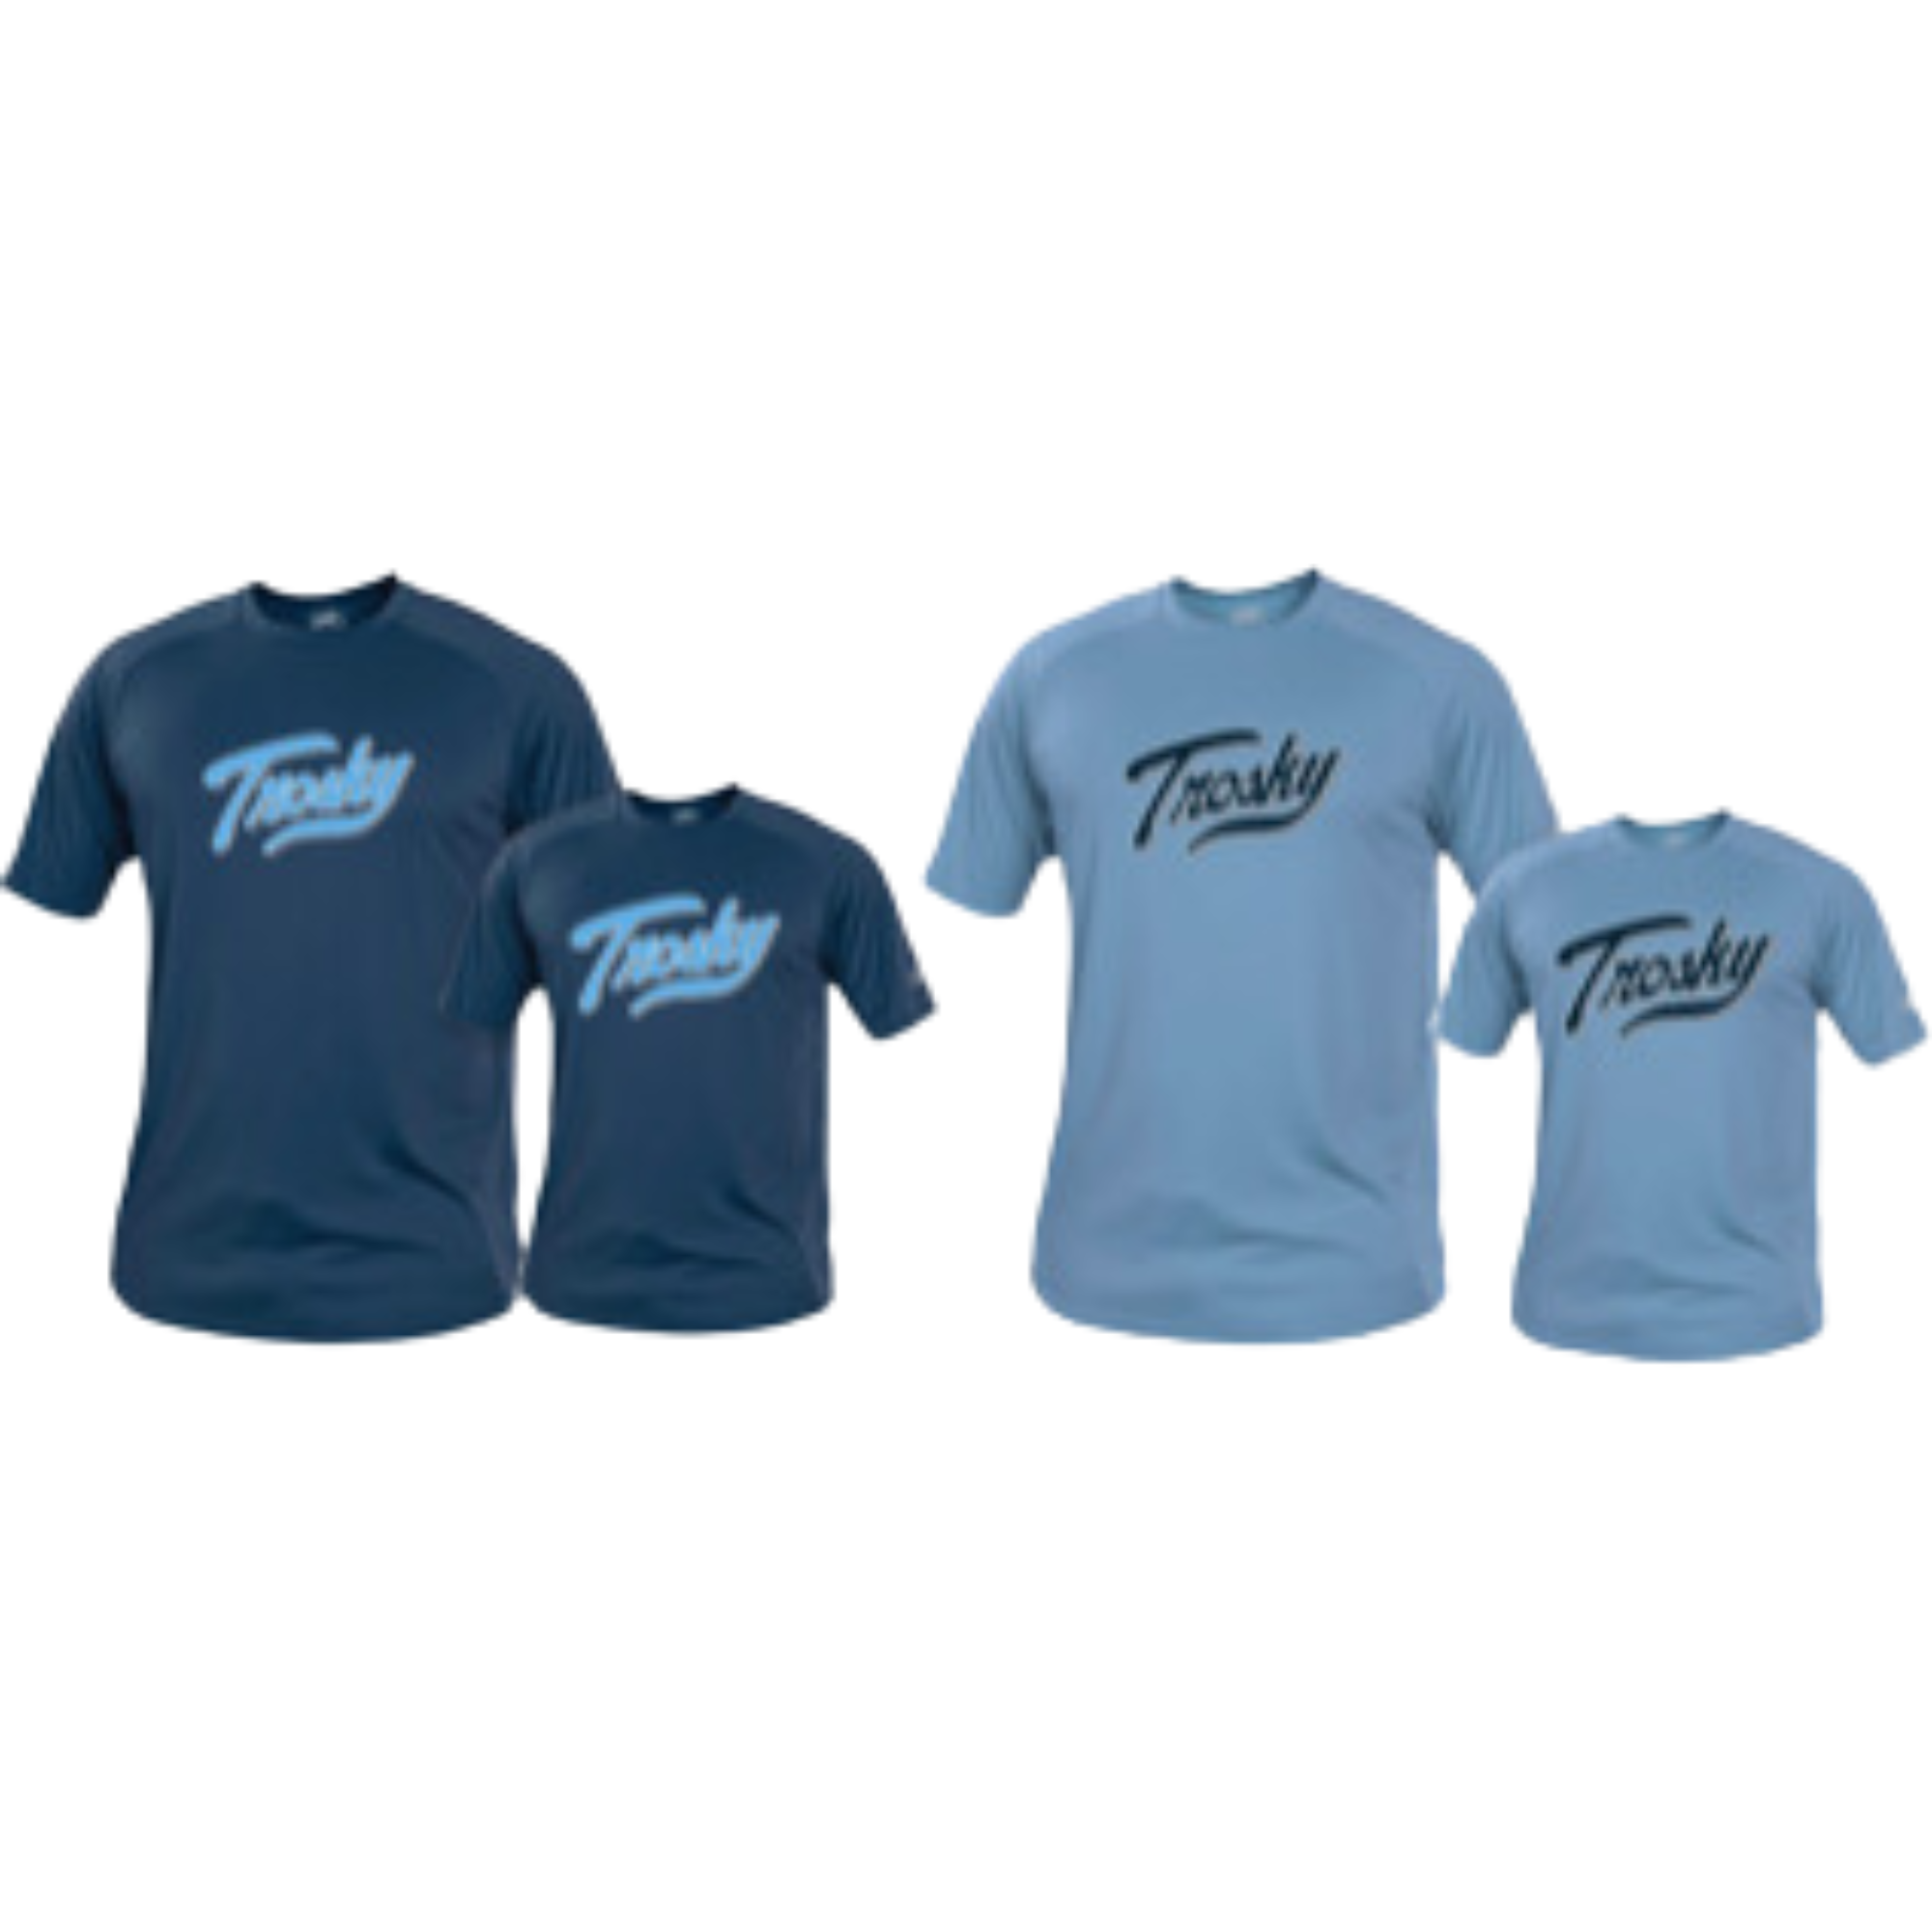 Rawlings Adult Trosky Fan Gear Numbered Performance Tee (set of 2 Col. Blue & Navy) - M